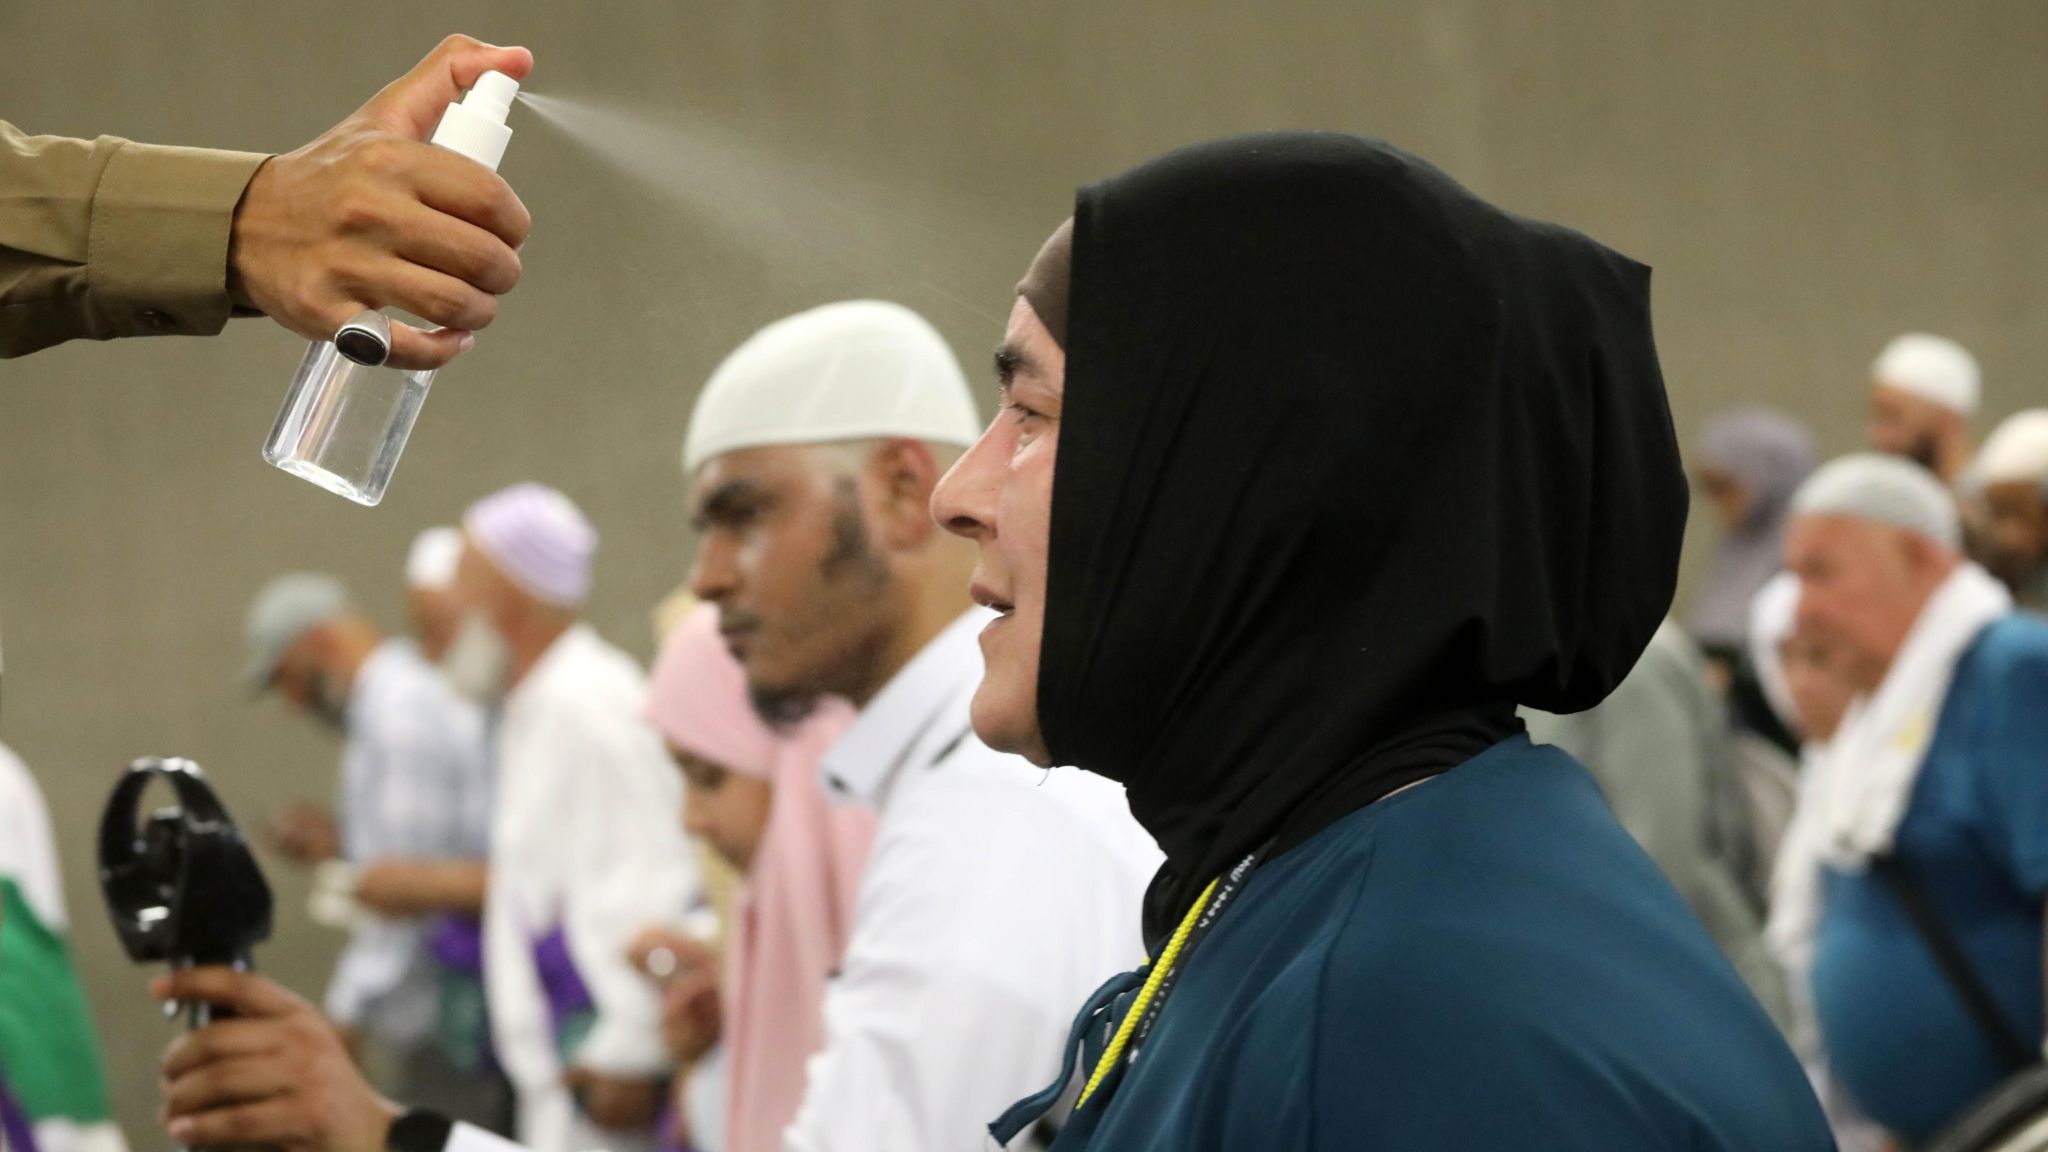 An official sprays water in a woman's face to cool down